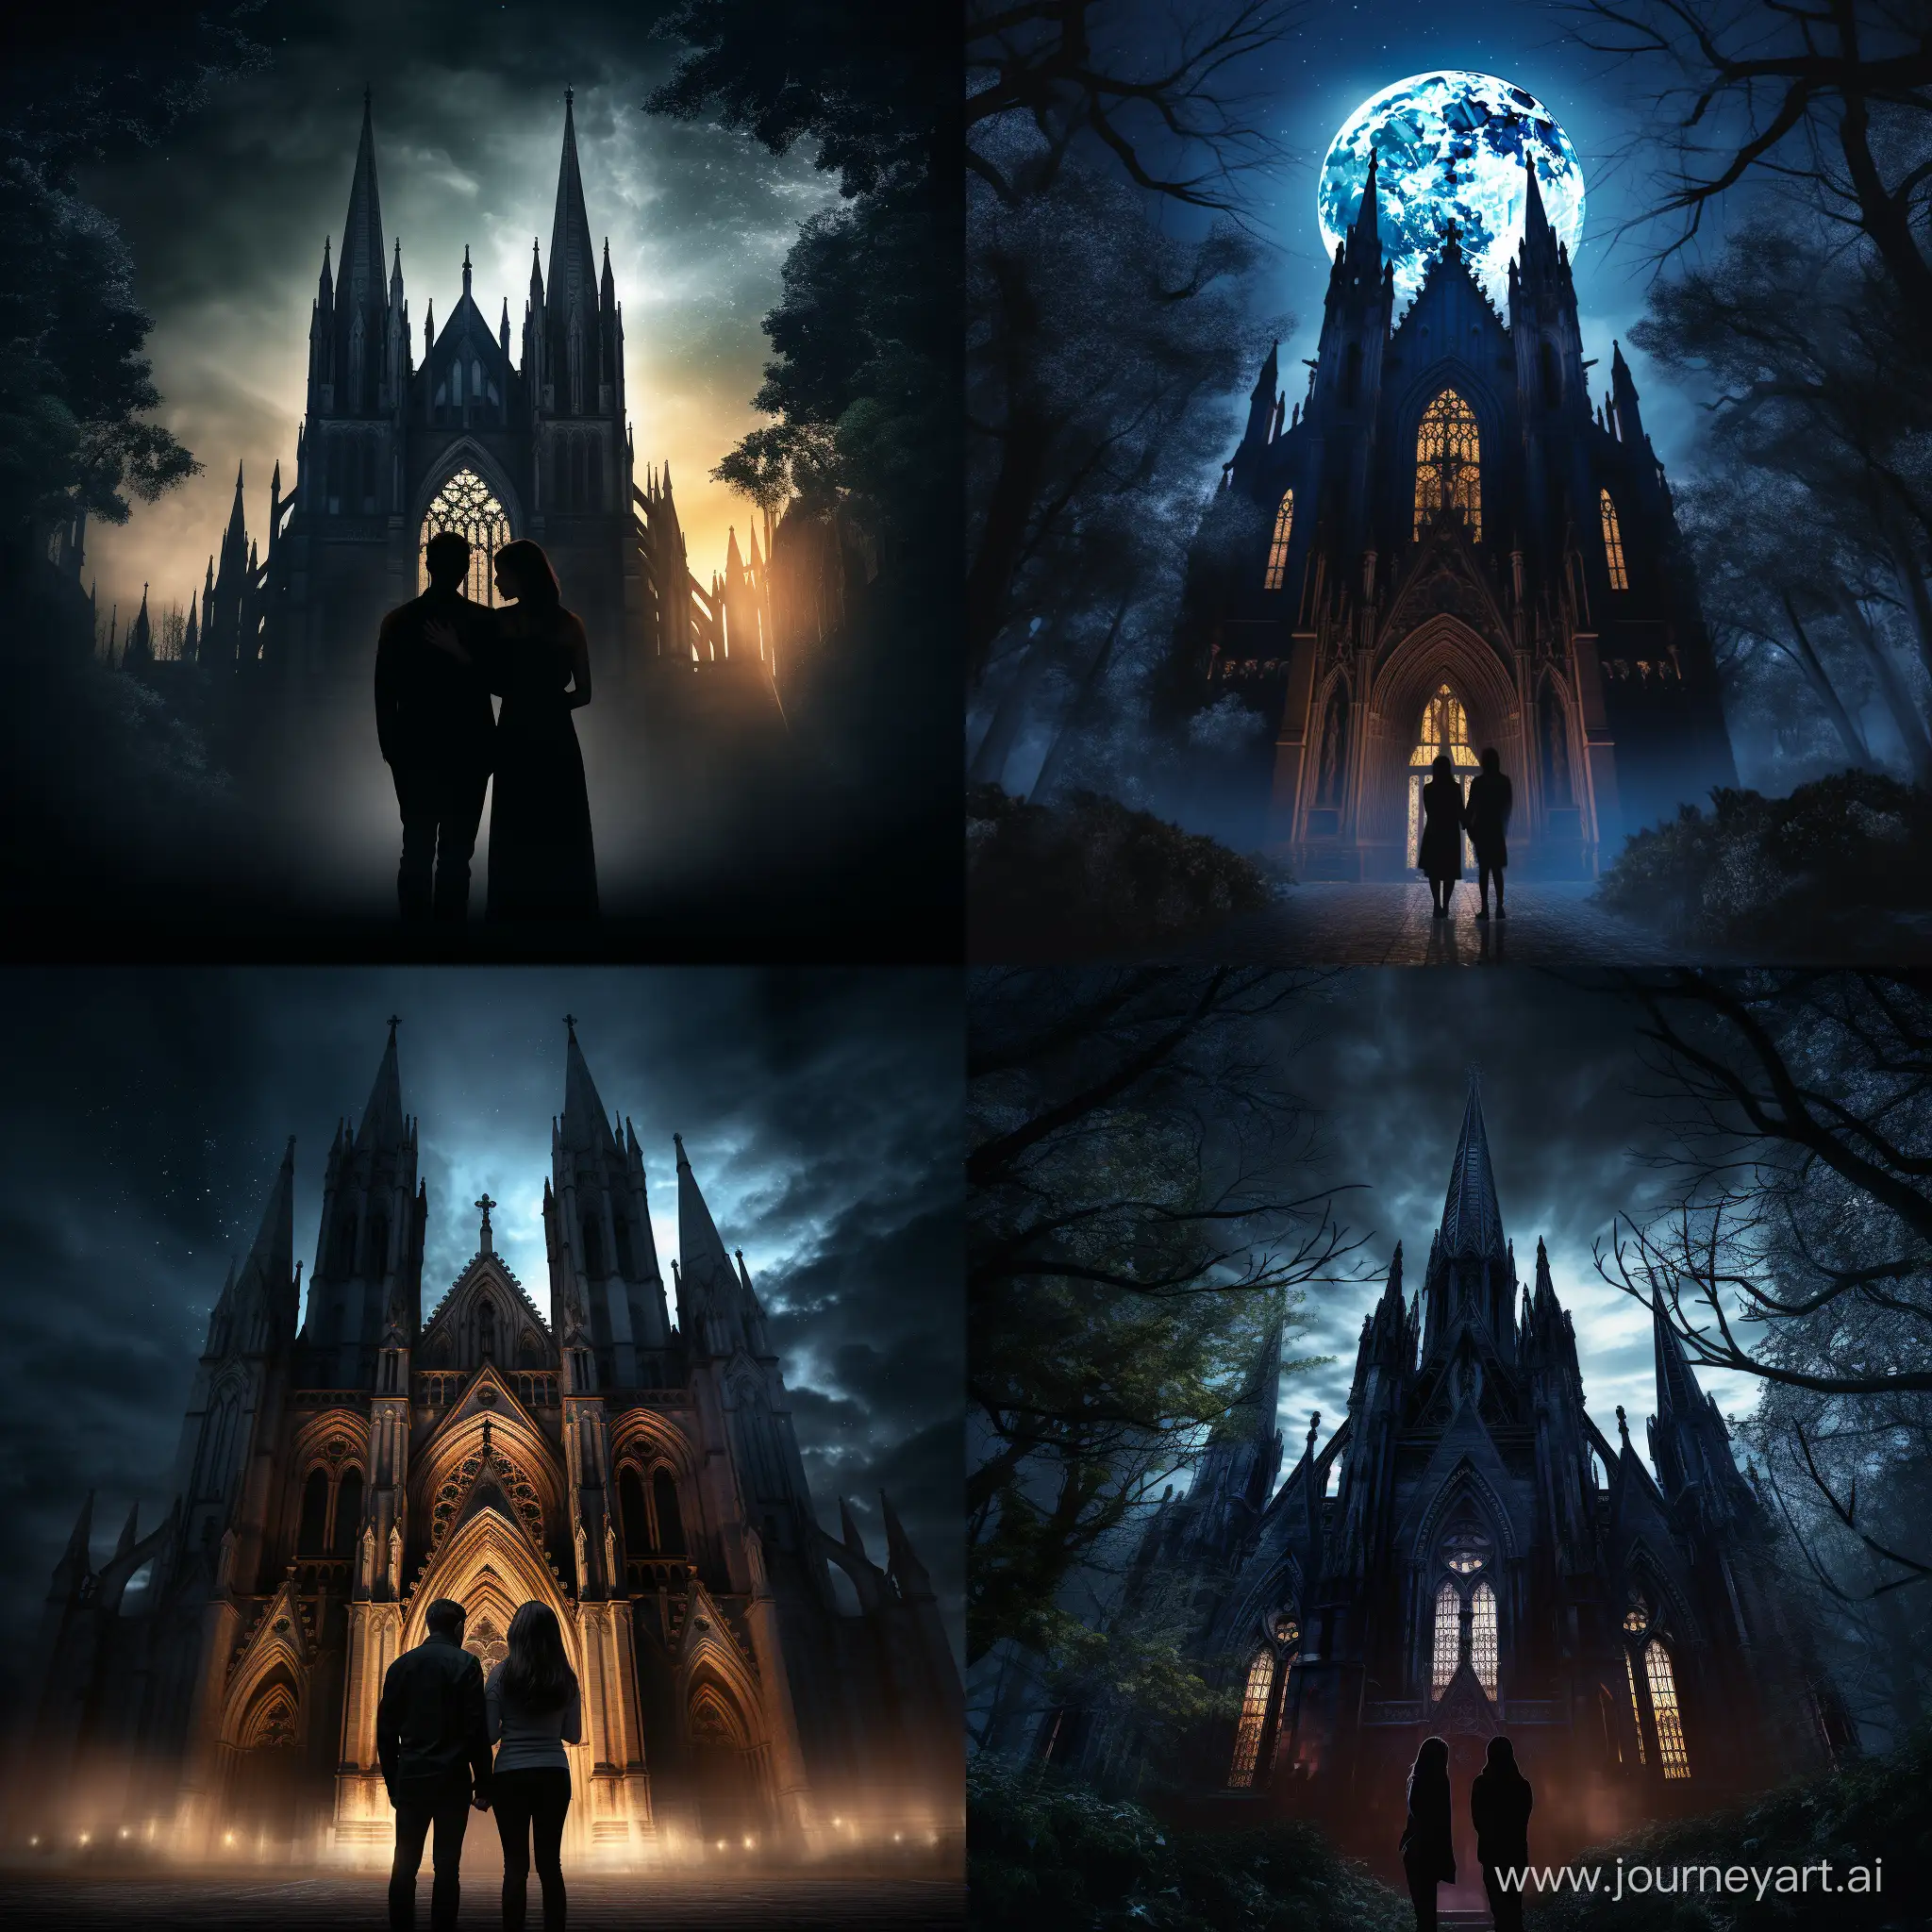 Eerie-Gothic-Cathedral-Embrace-Moonlit-Couple-in-Surreal-Realism